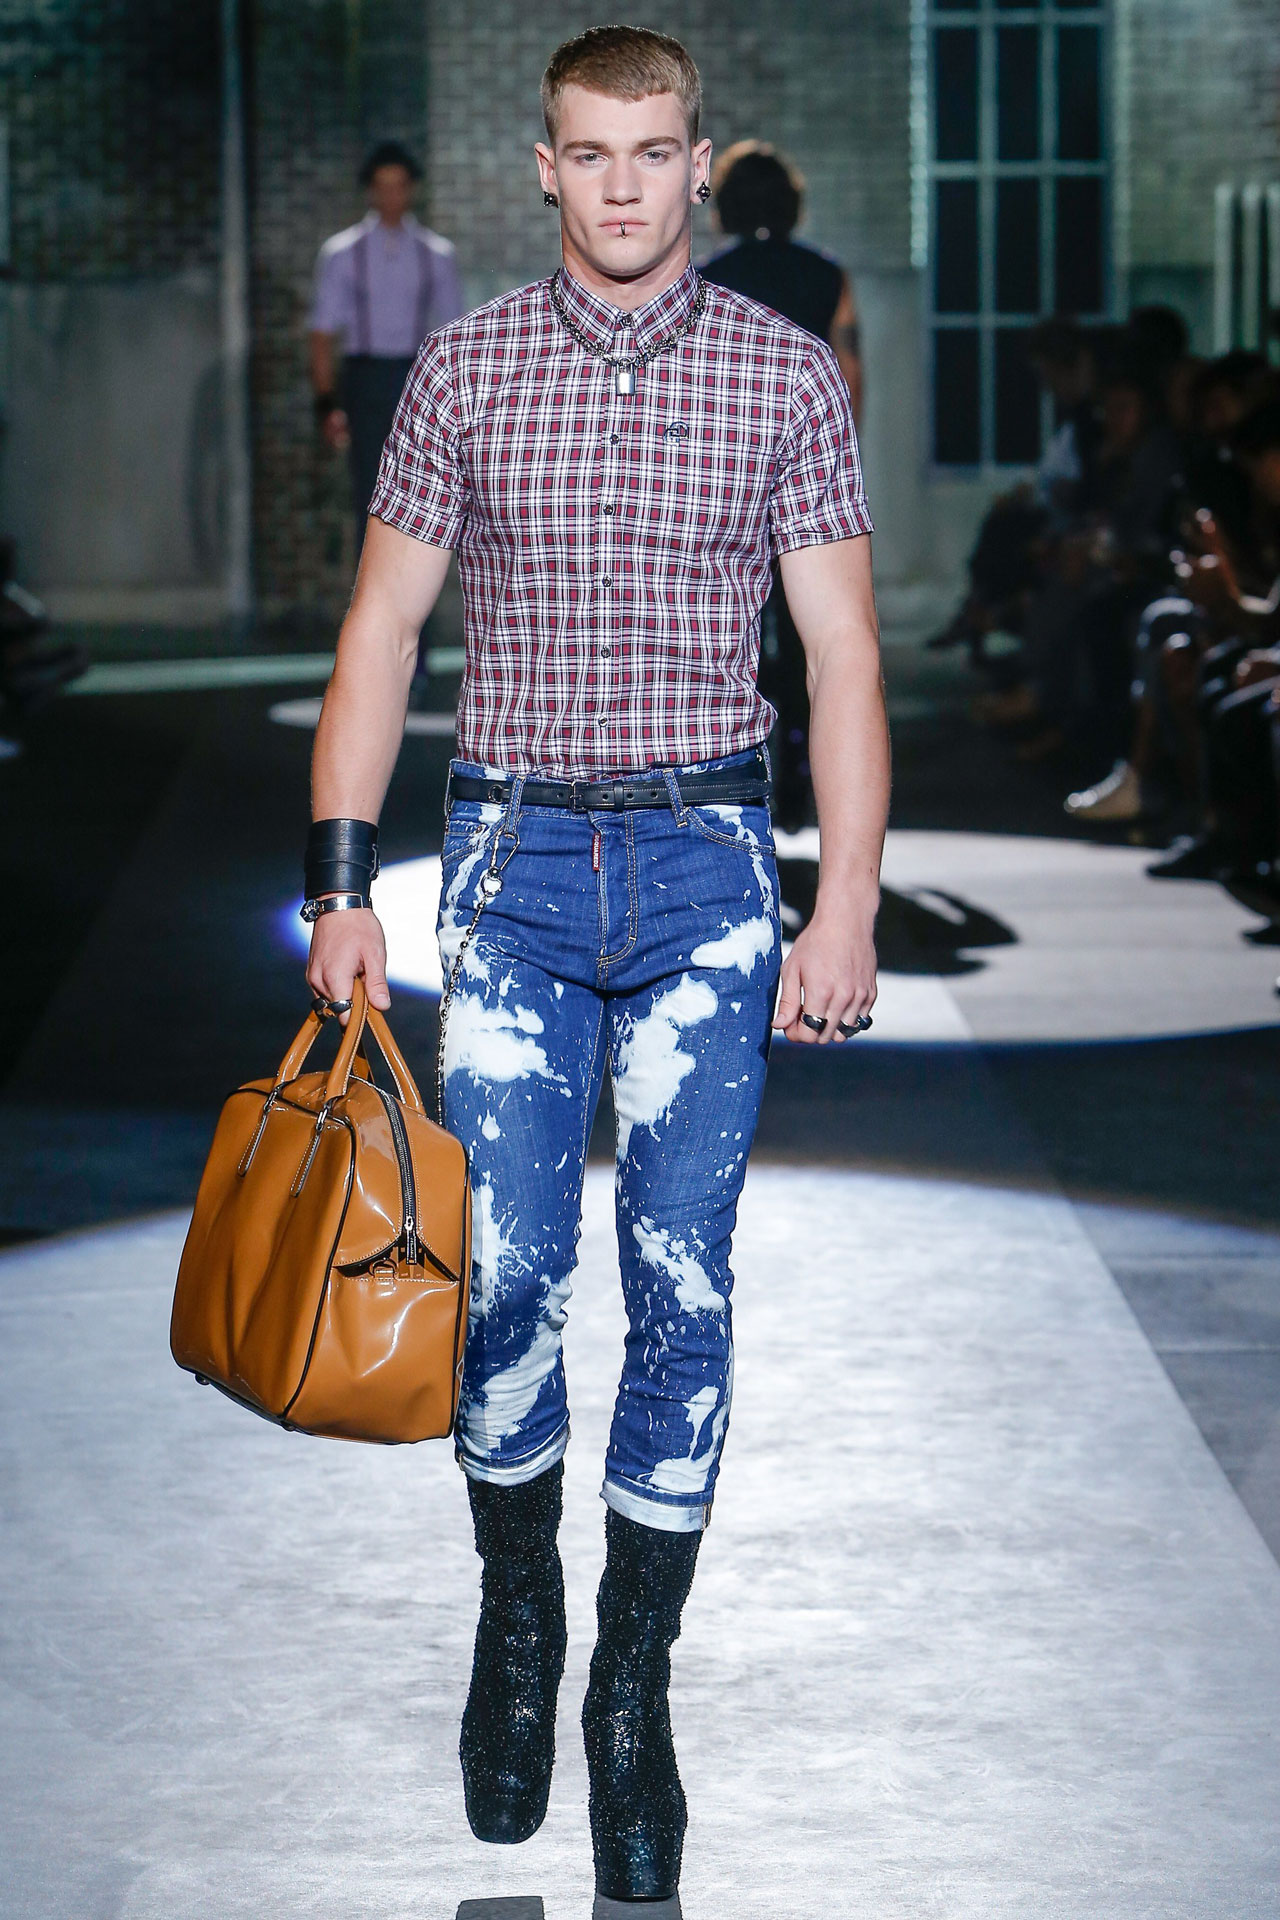 xdsquared3